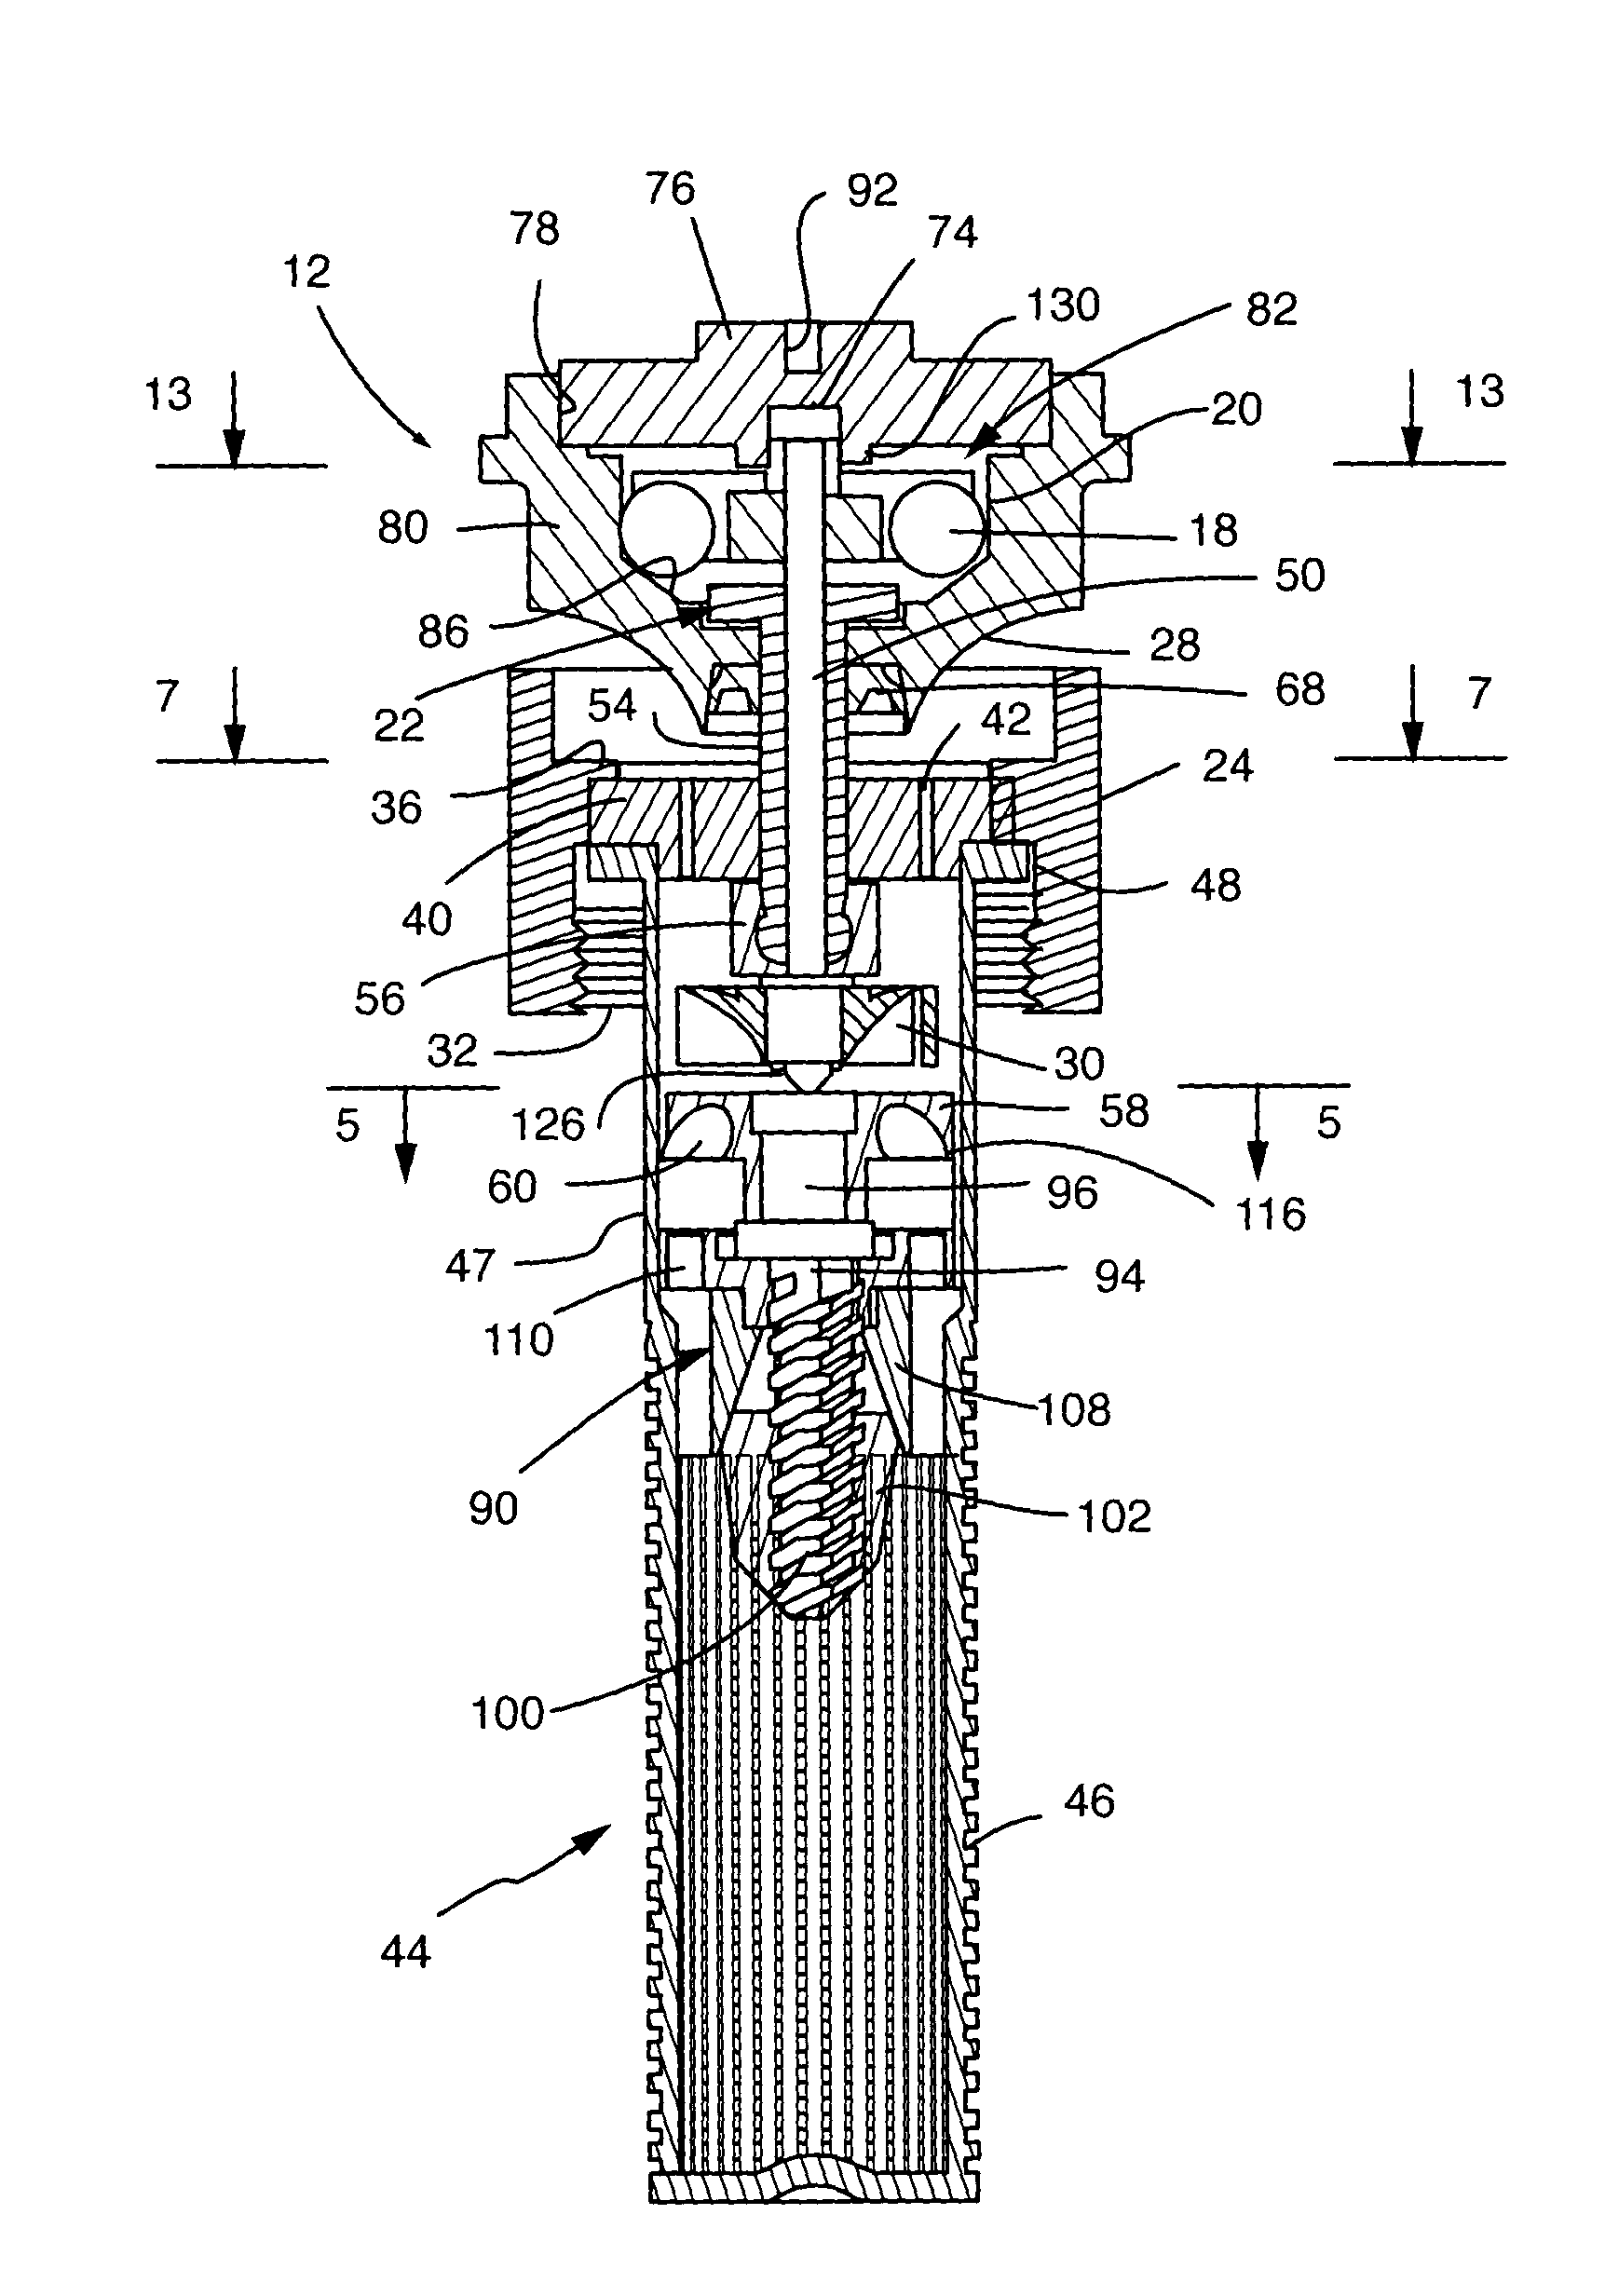 Rotating stream sprinkler with ball drive